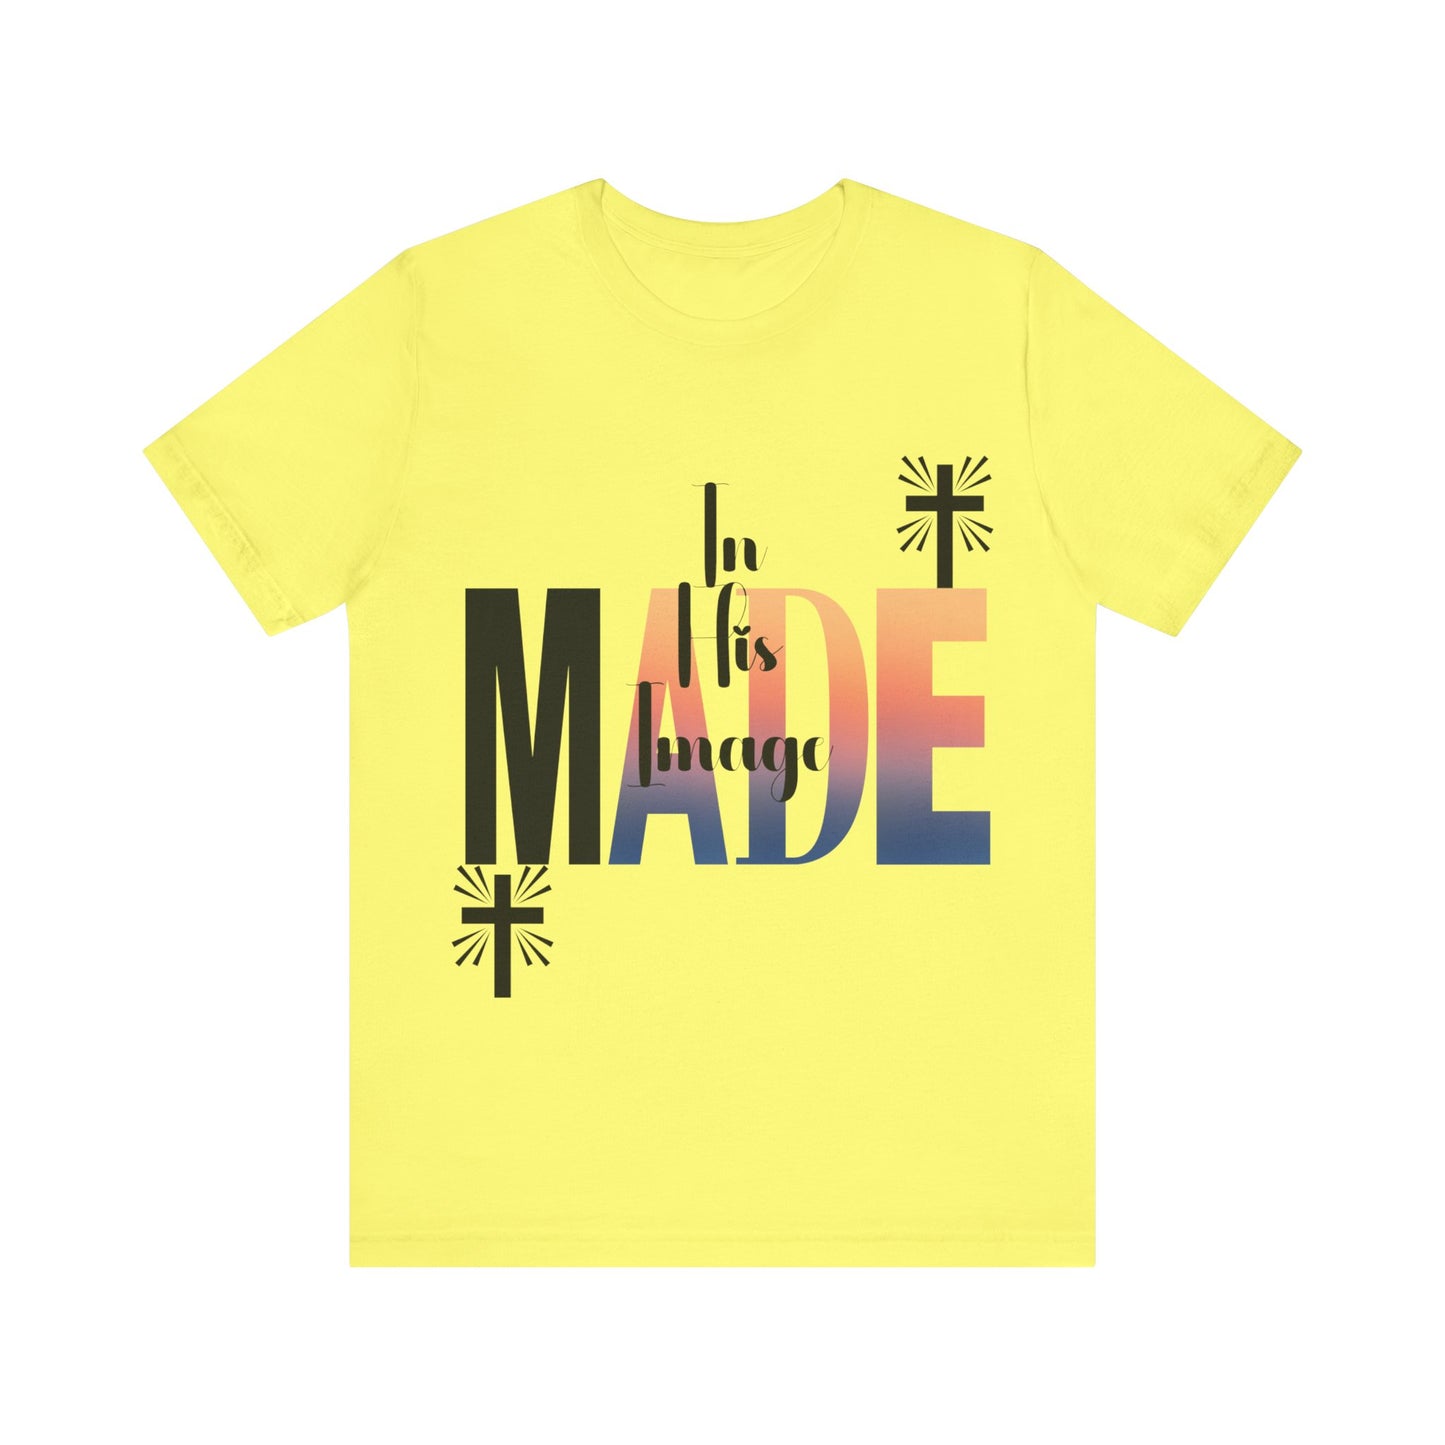 Made in His Image Short Sleeve Crew Neck Unisex Adult Top